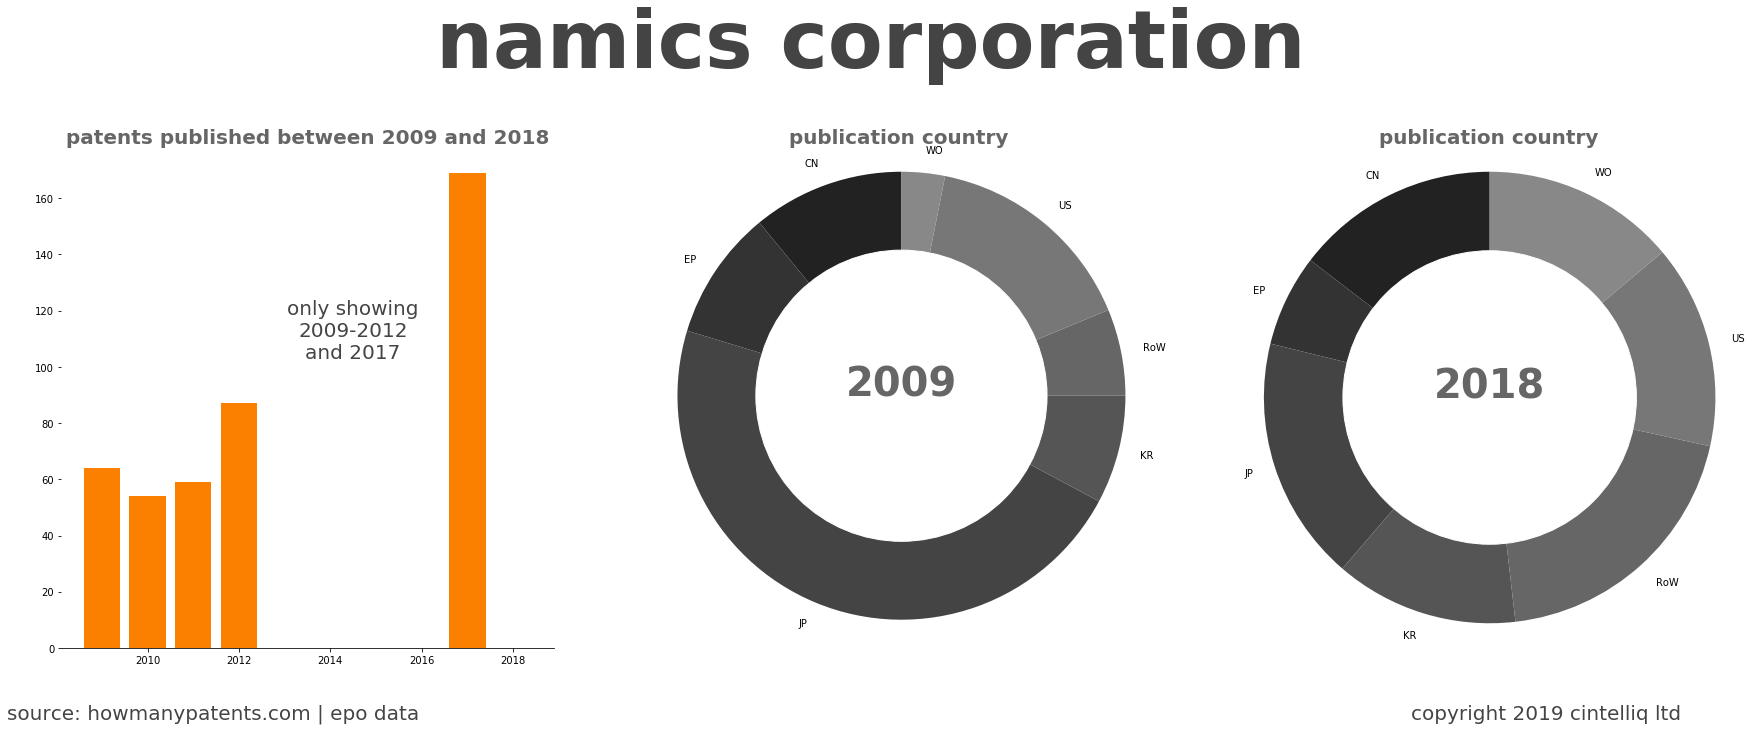 summary of patents for Namics Corporation